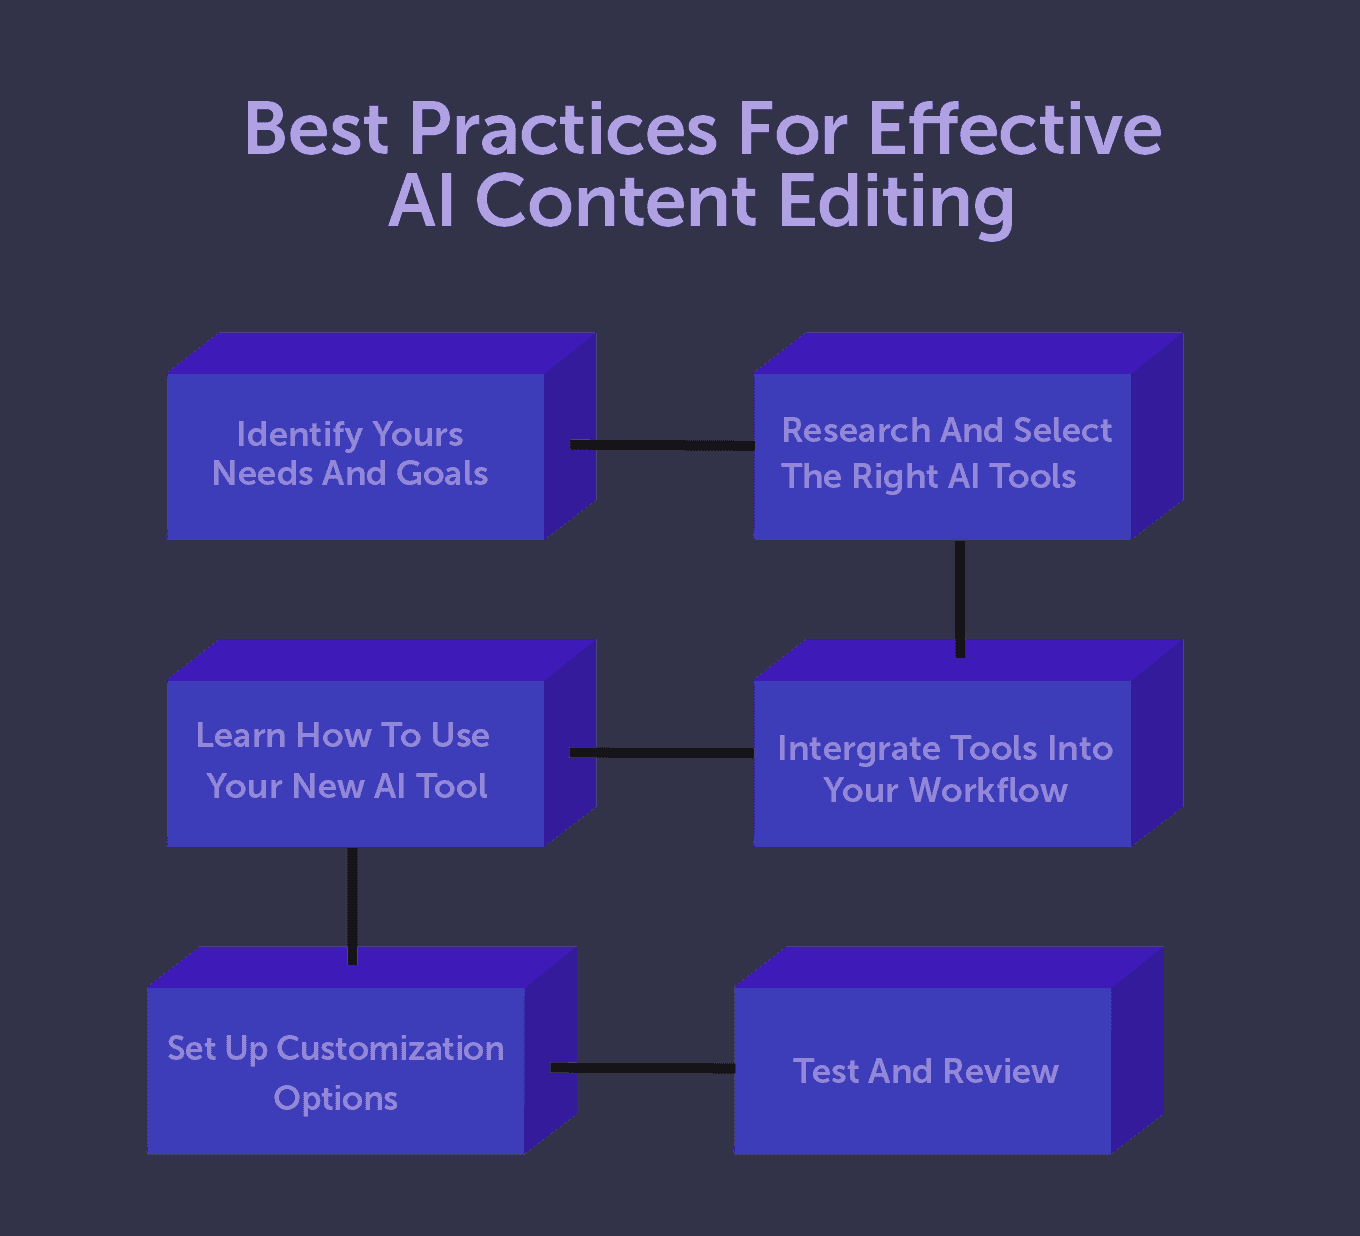 Best practices for effective AI content editing chart